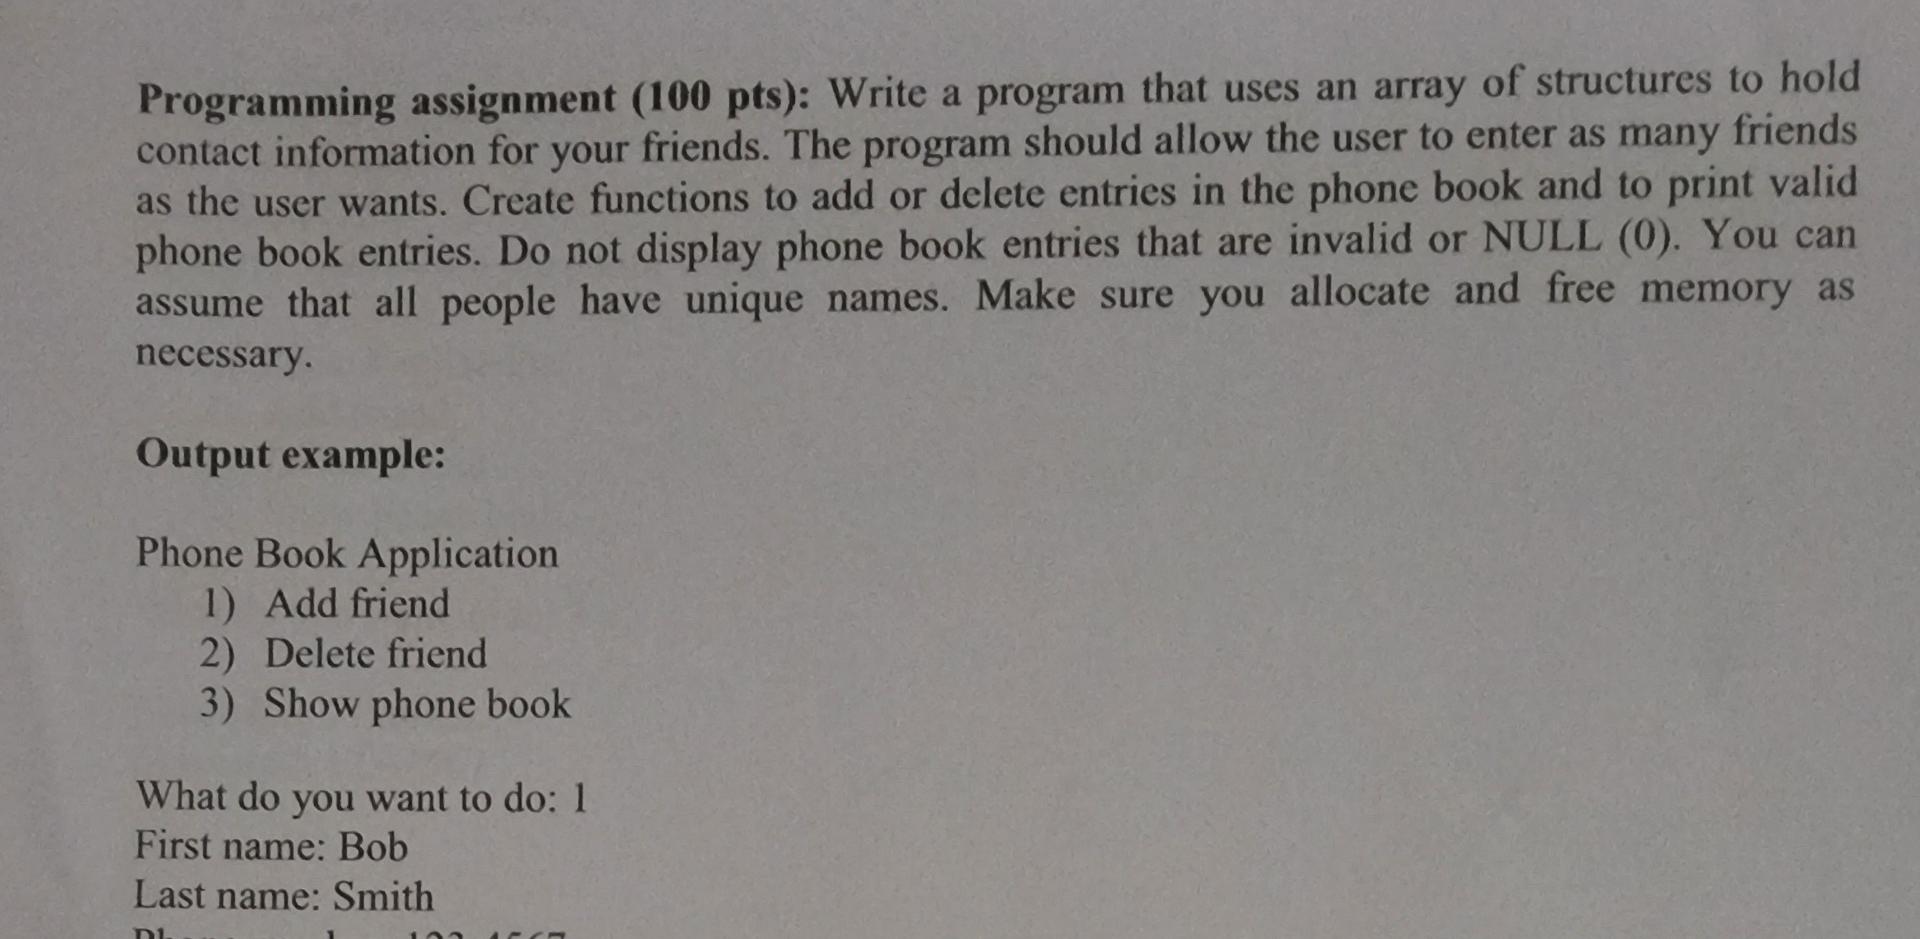 Programming assignment (100 pts): Write a program that uses an array of structures to hold contact